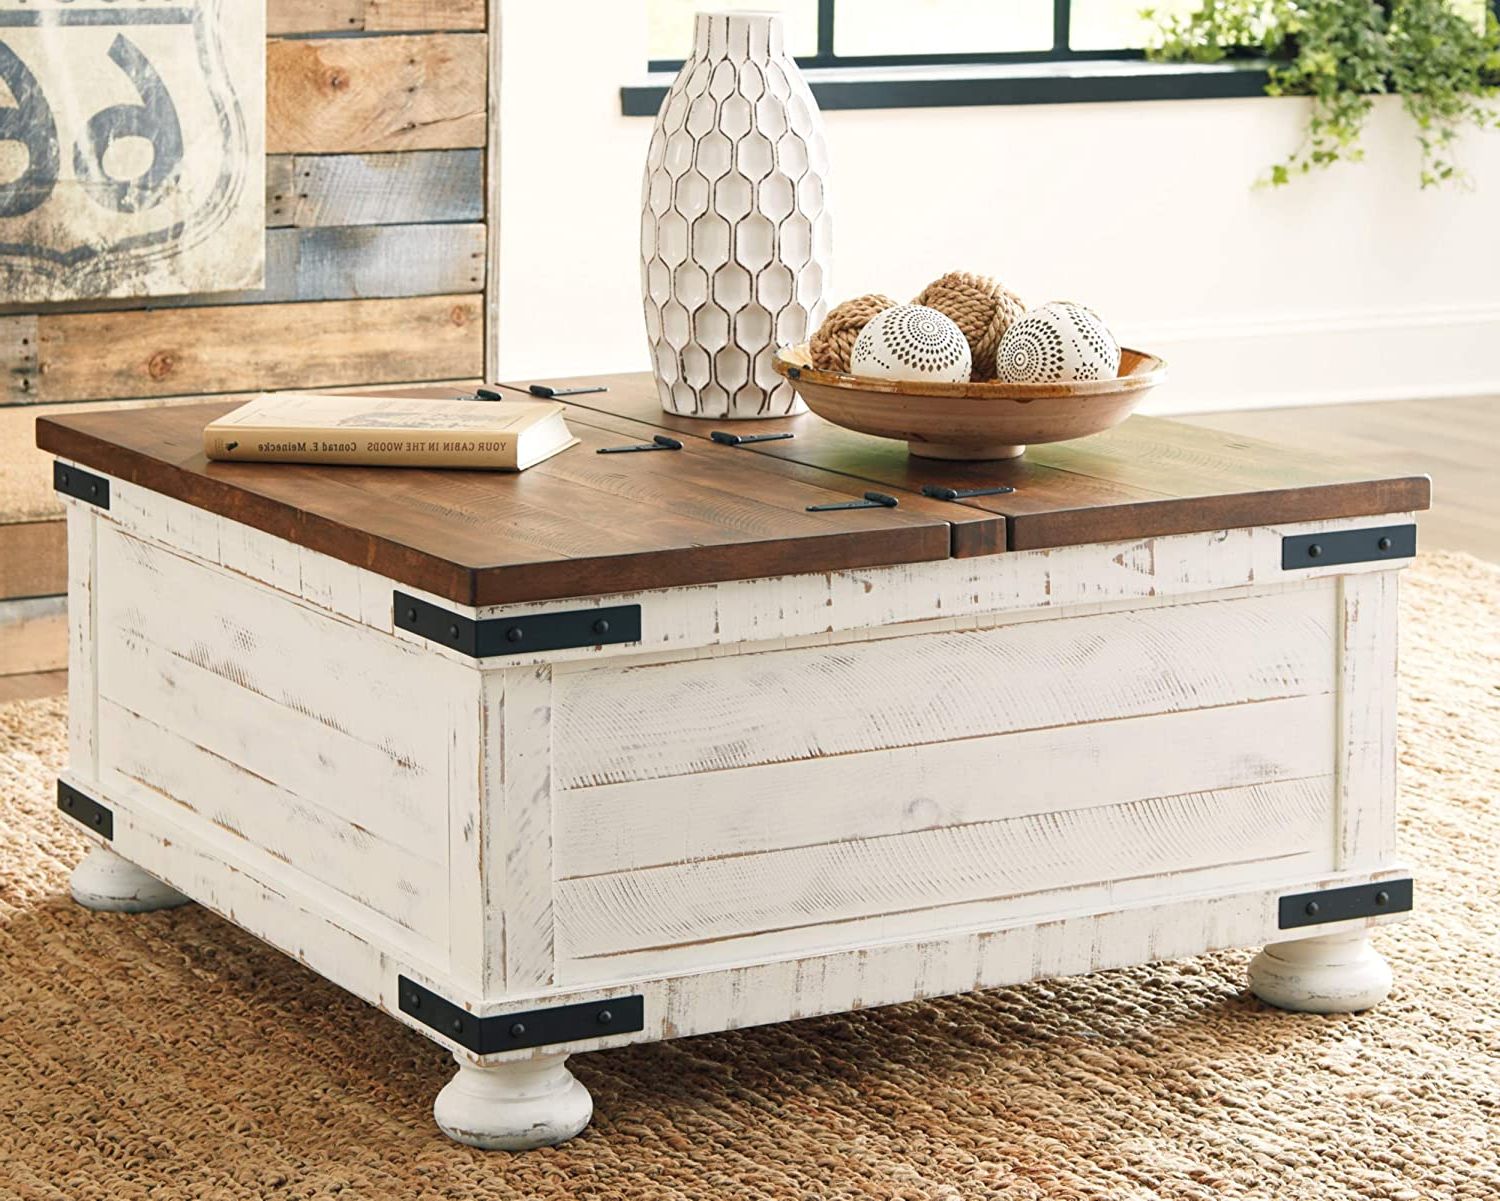 Living Room Farmhouse Coffee Tables Within 2019 The 10 Best Farmhouse Coffee Tables (for Any Budget) (View 3 of 15)